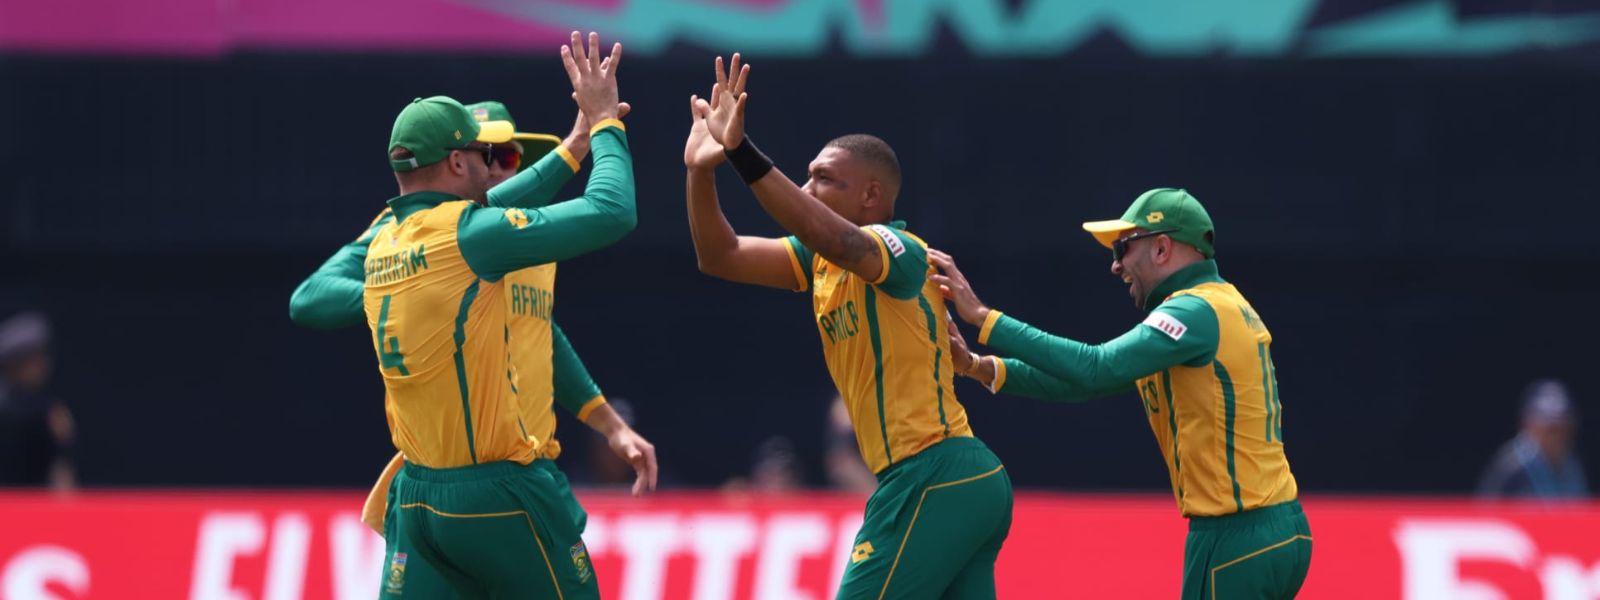 South Africa beat Sri Lanka with bowling display